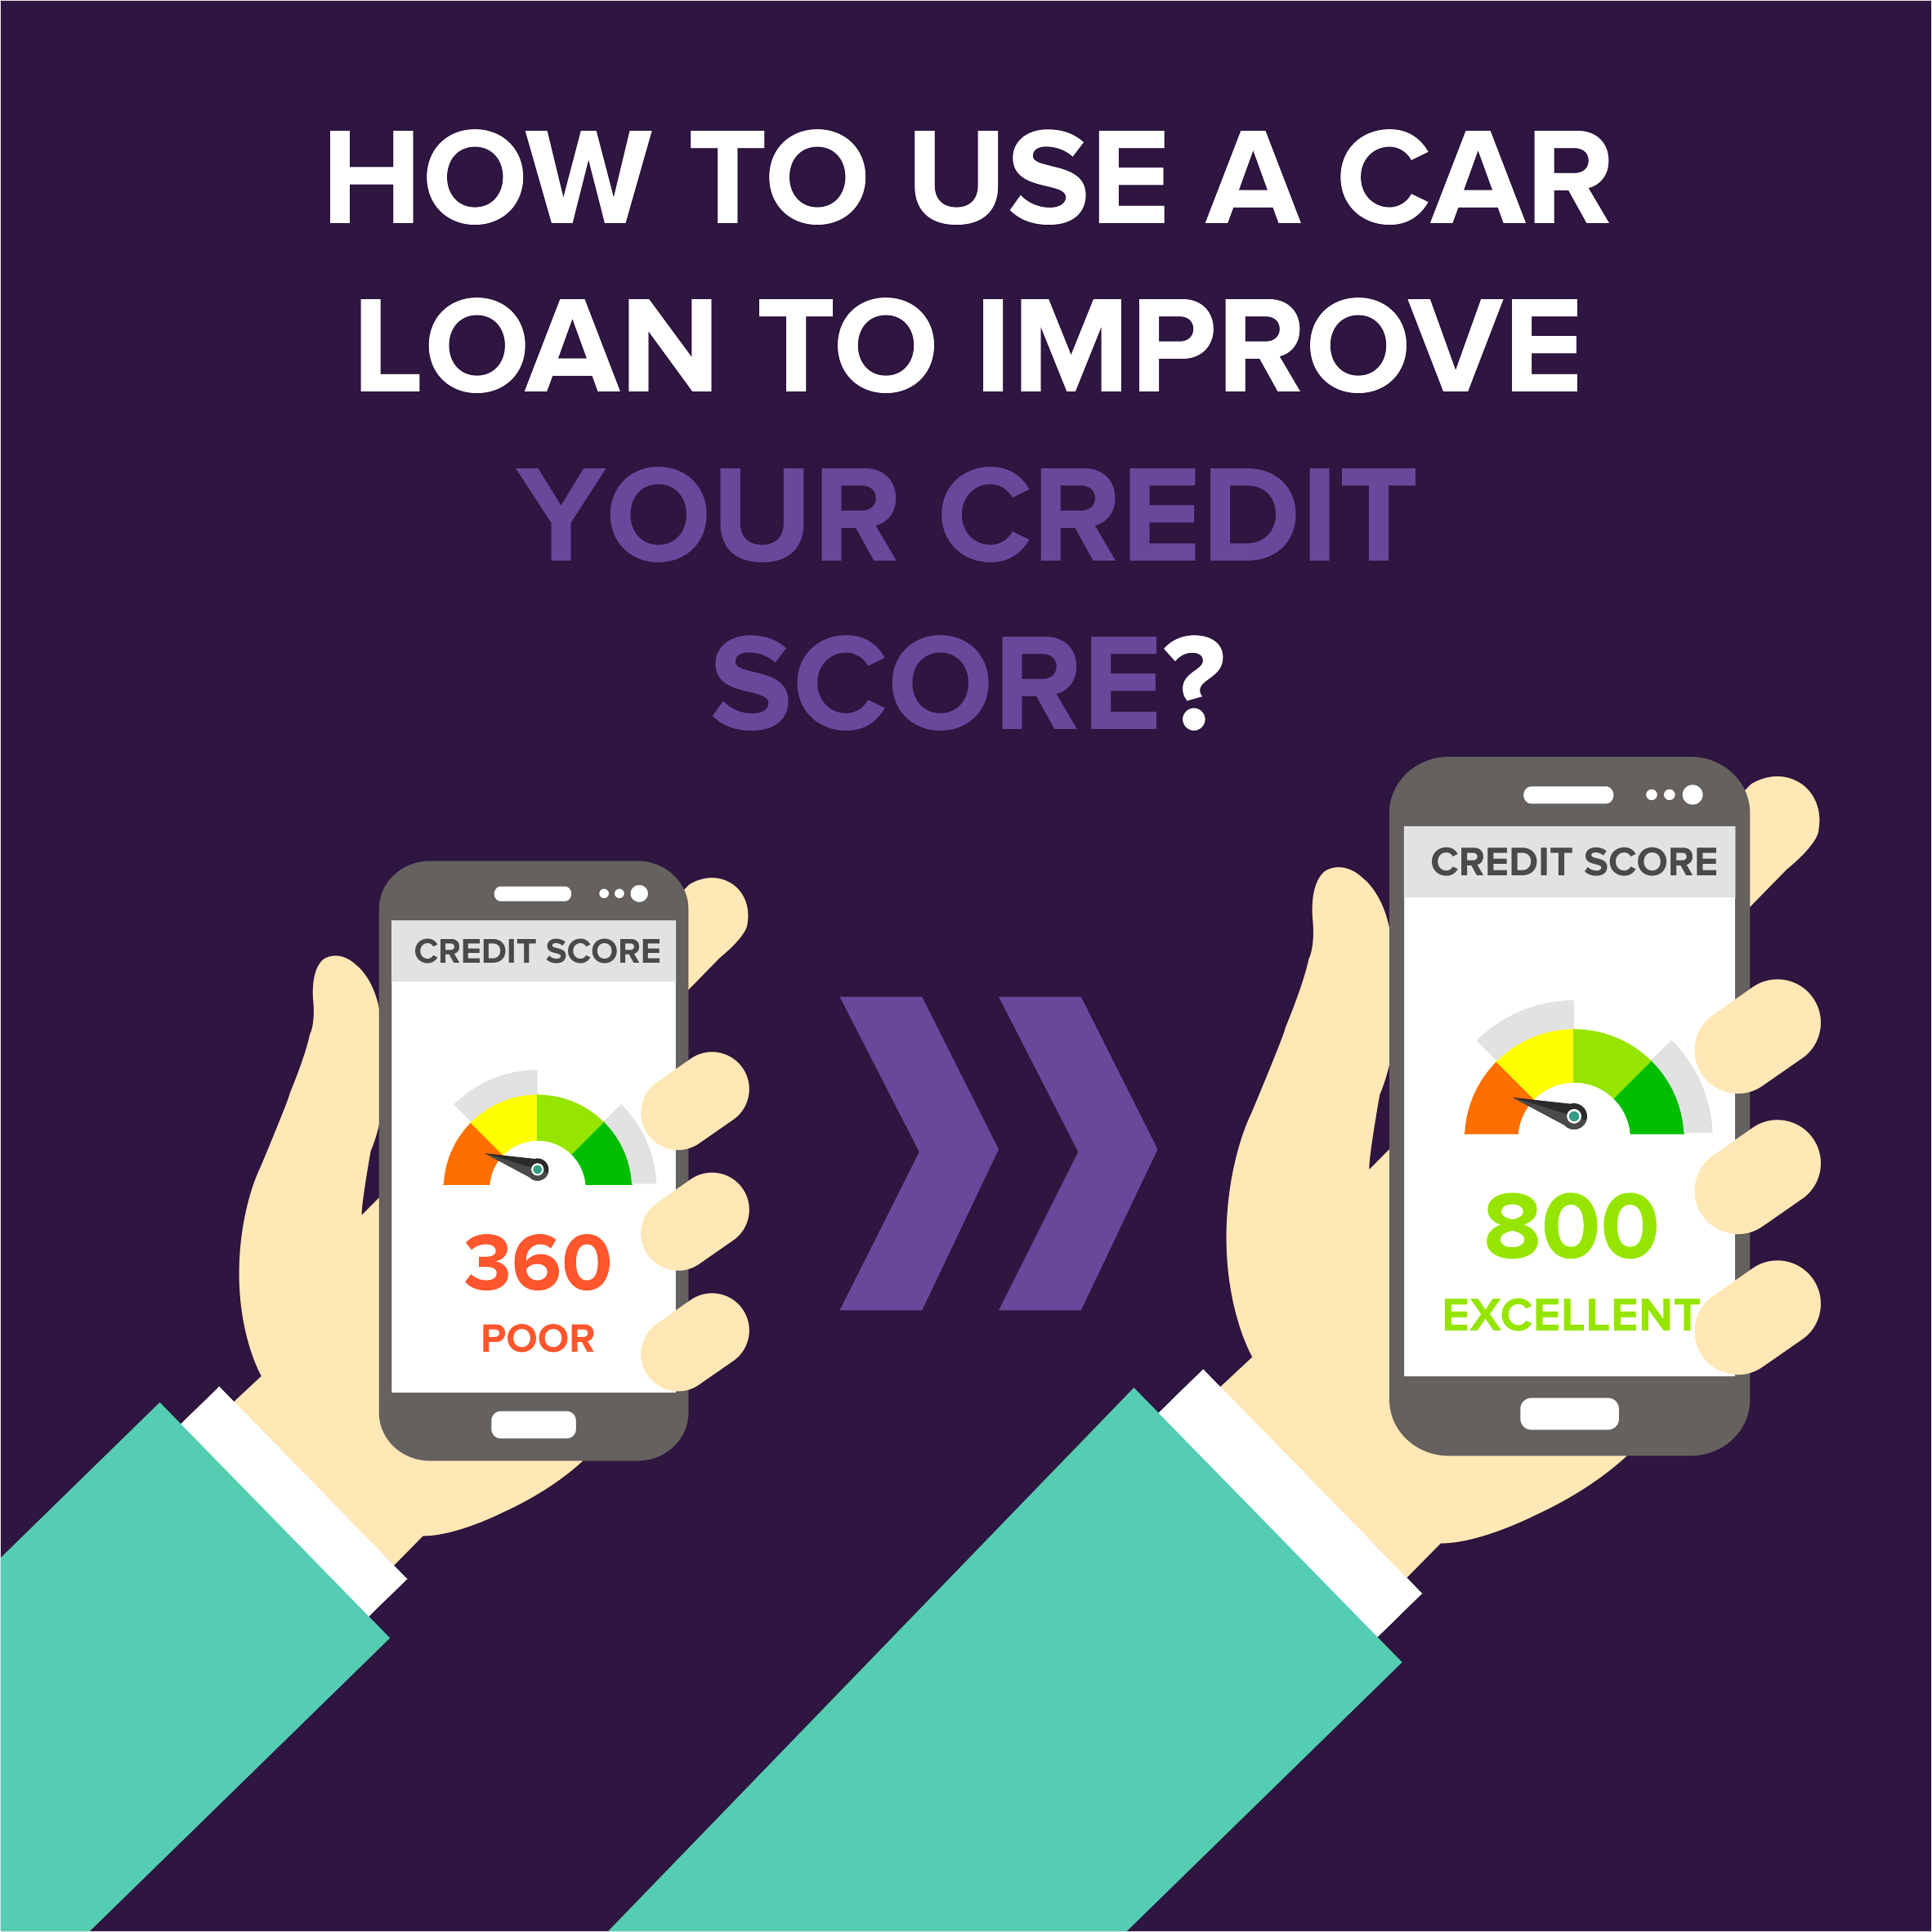 How You Can Use a Car Loan to Improve Your Credit Score